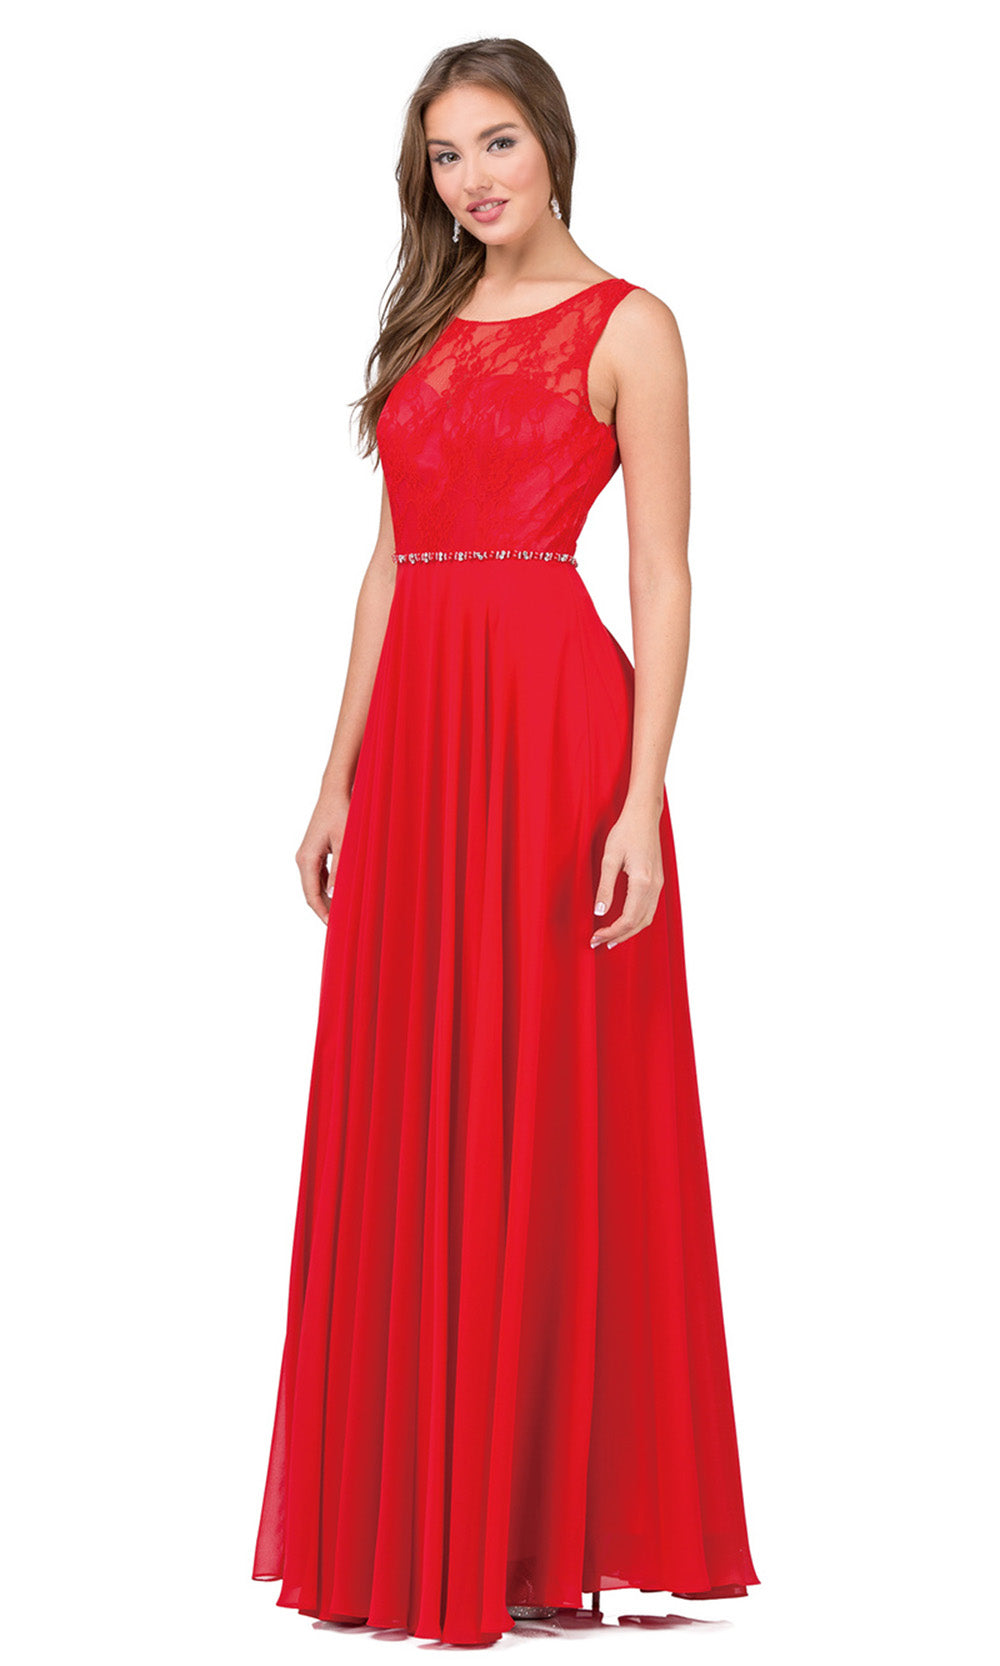 Dancing Queen - 2240 Illusion Neckline Lace Bodice A-Line Gown In Red